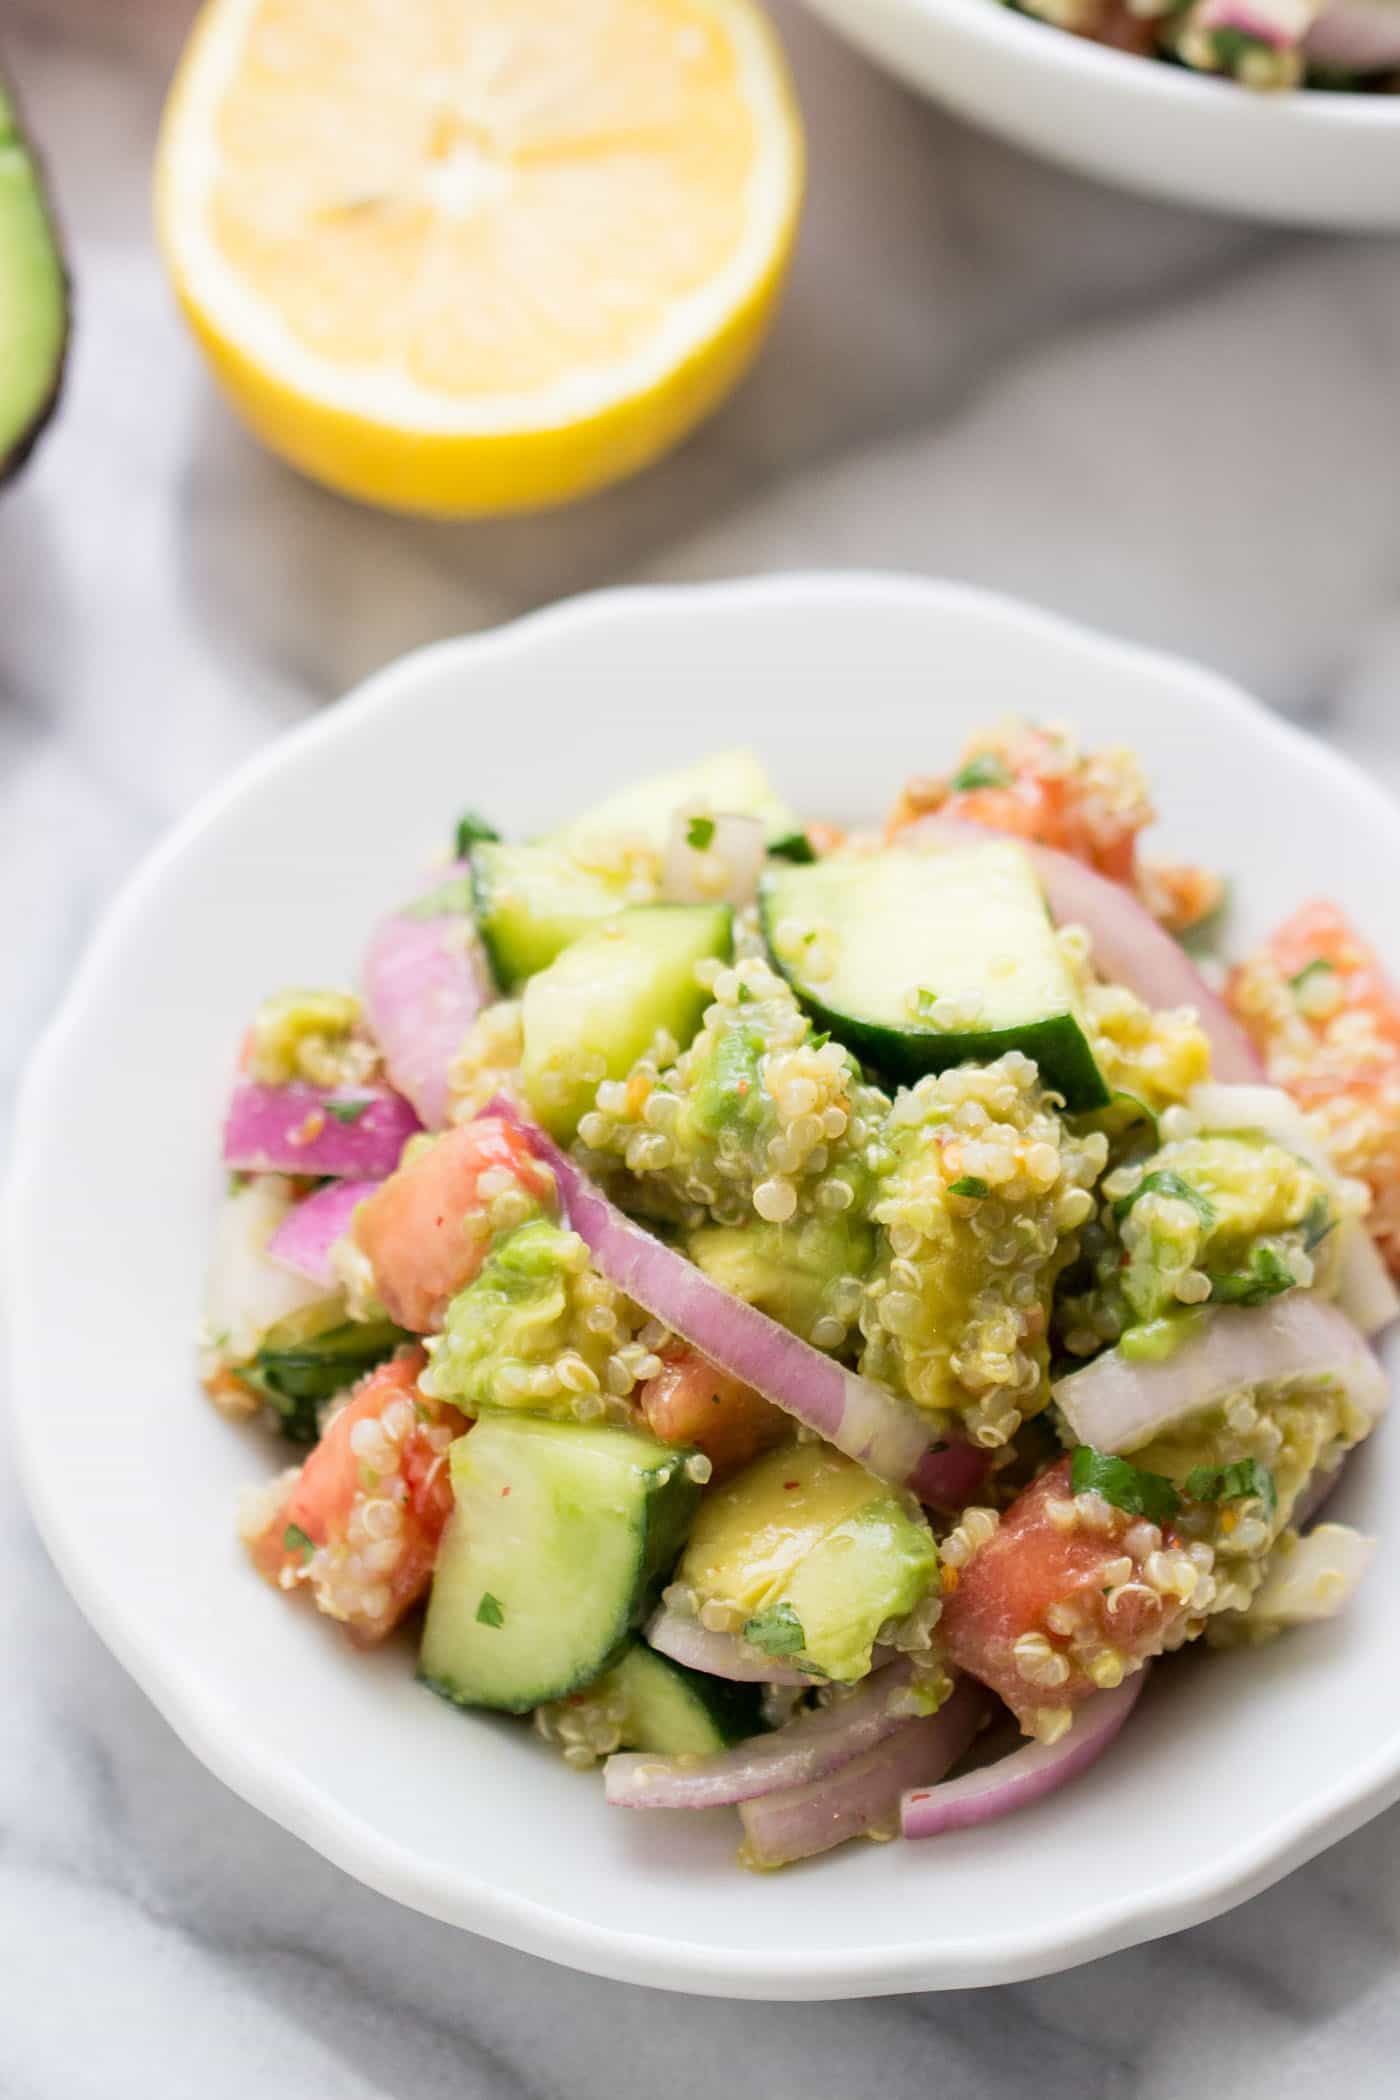 A simple avocado quinoa salad with cucumbers and tomatoes -- perfect for lunch or for a light, summer meal!